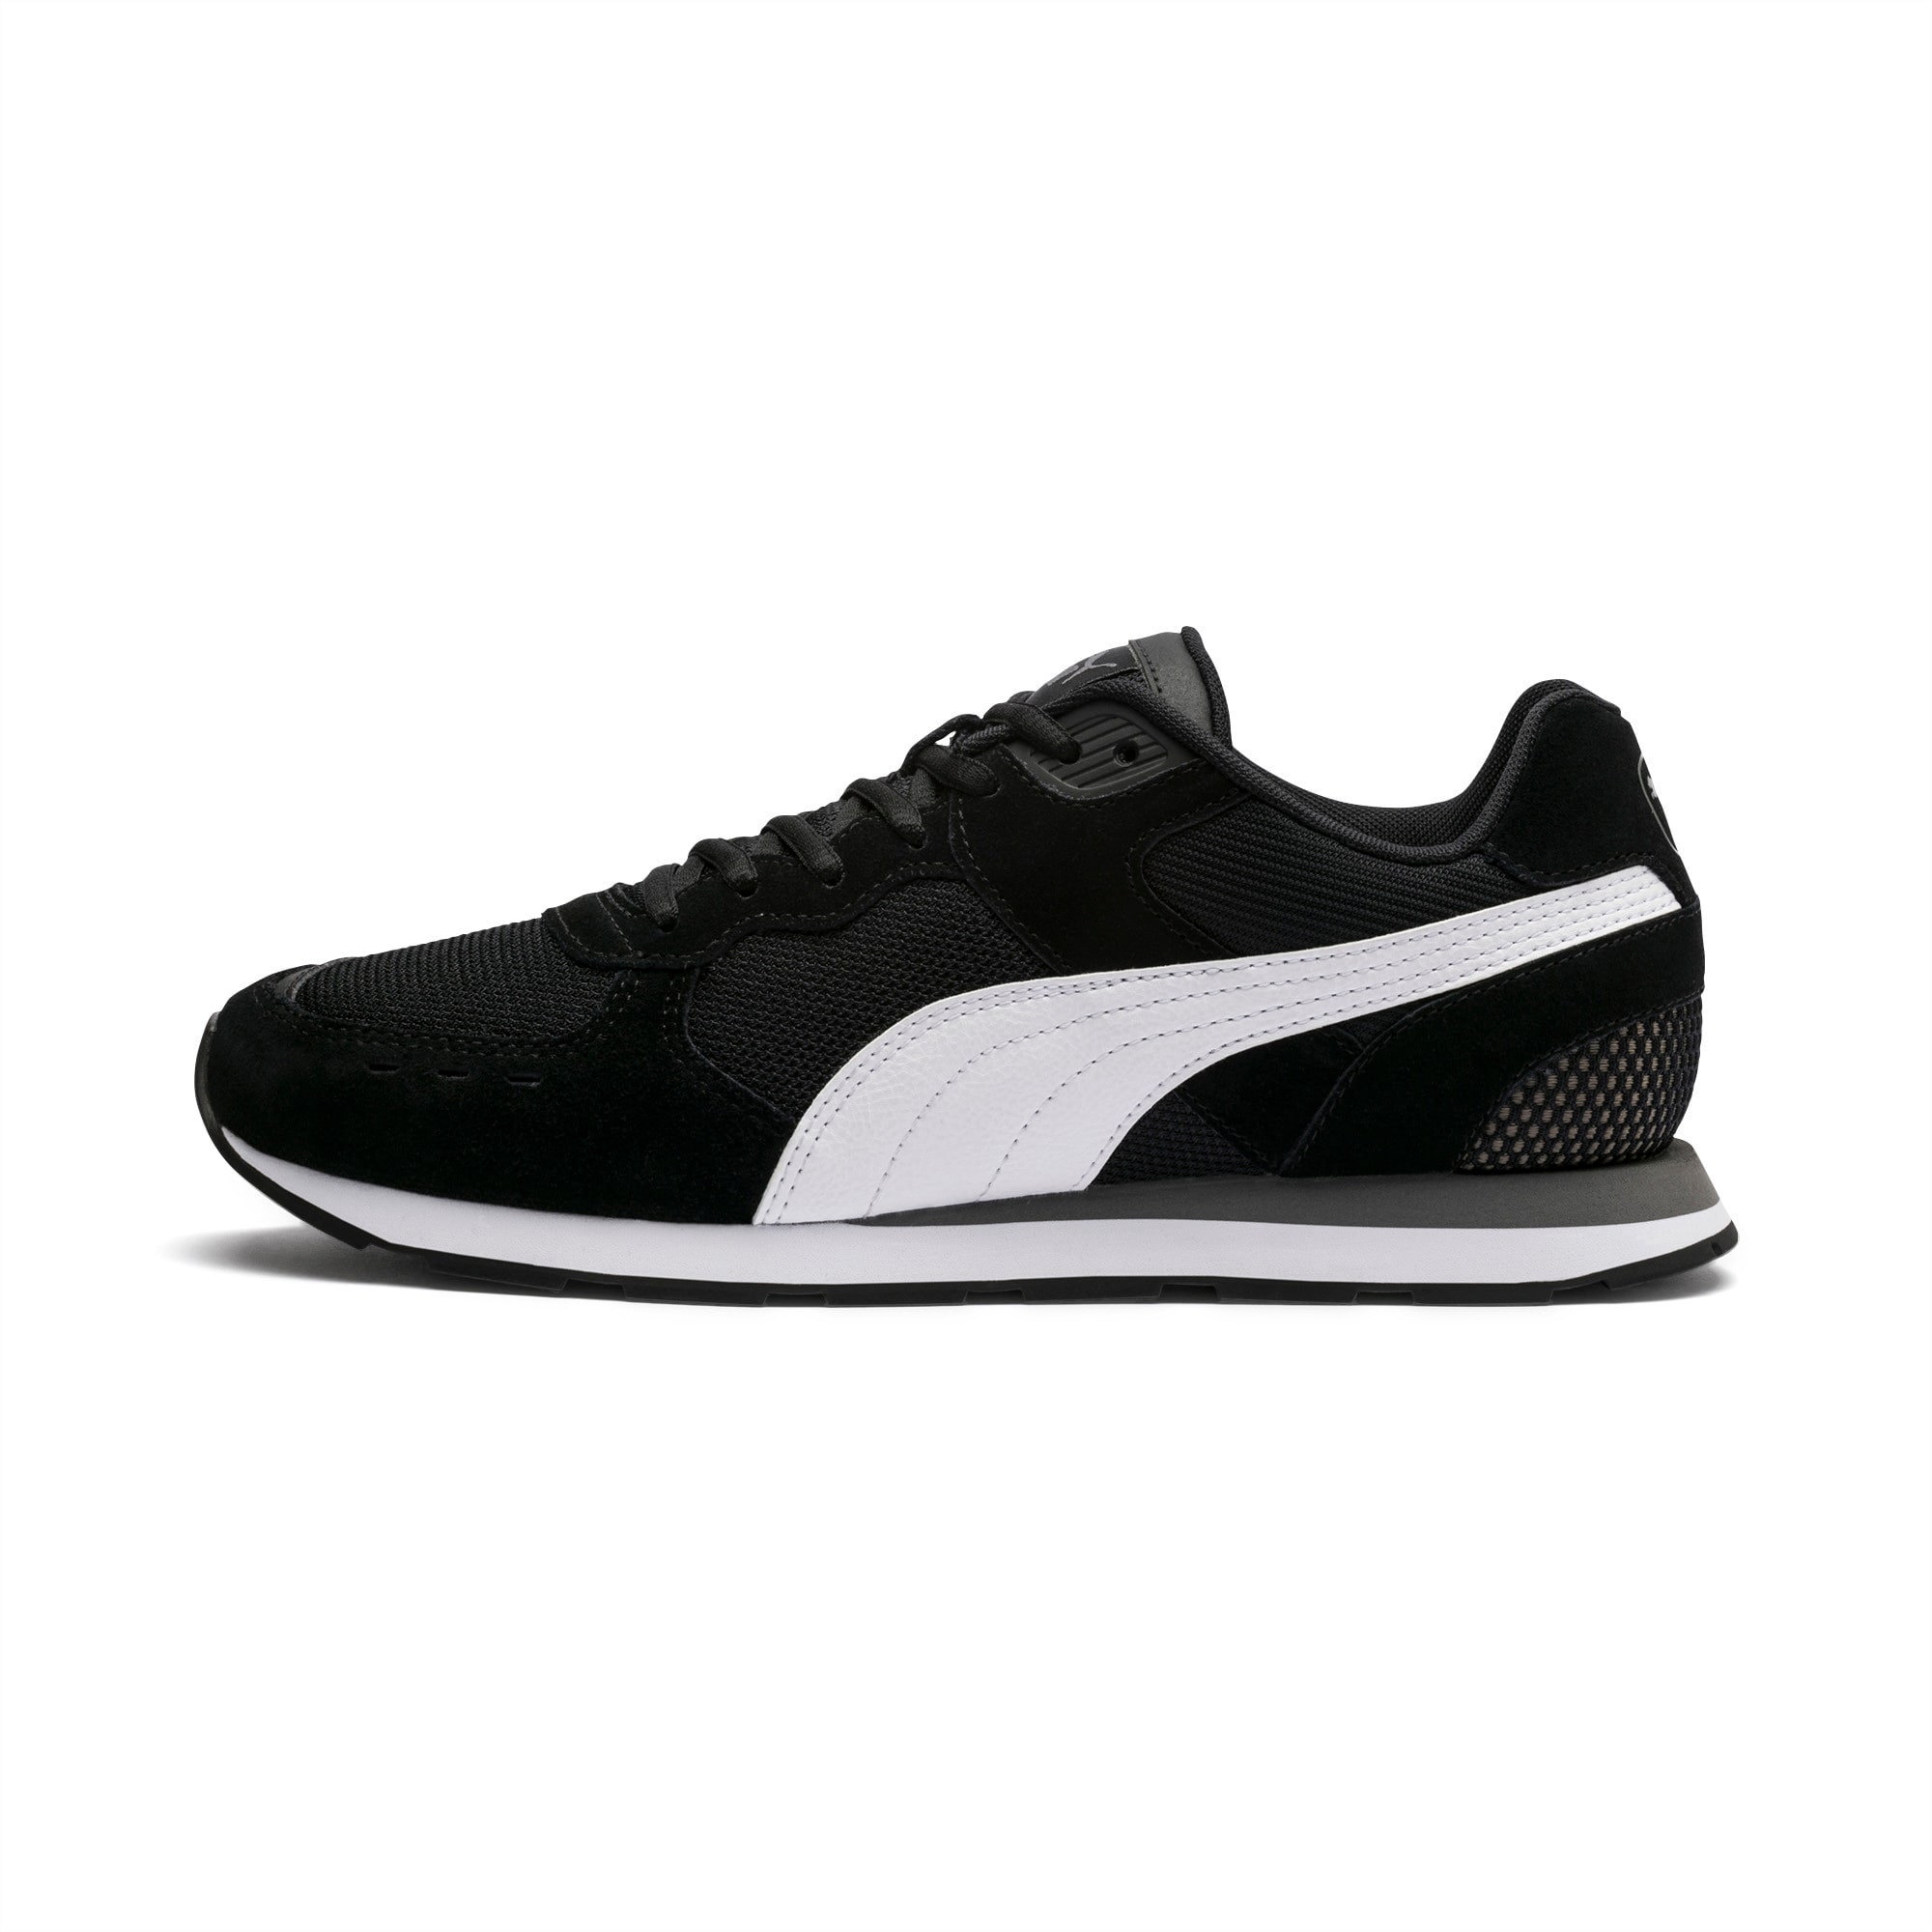 black and grey womens tennis shoes